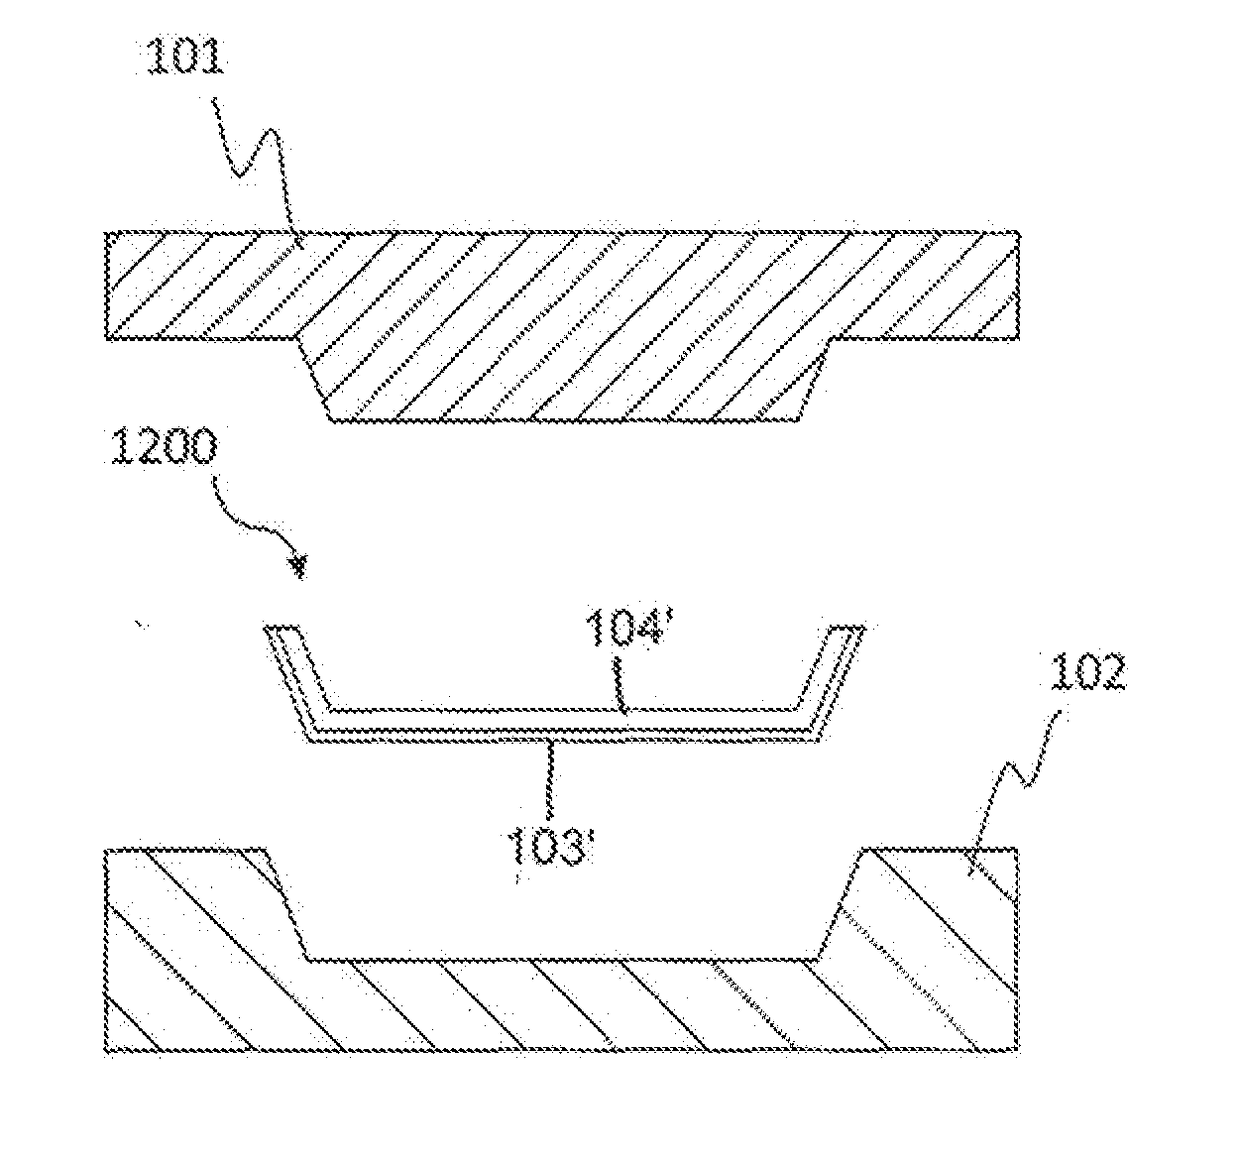 Method for manufacturing composite part of polymer and metal